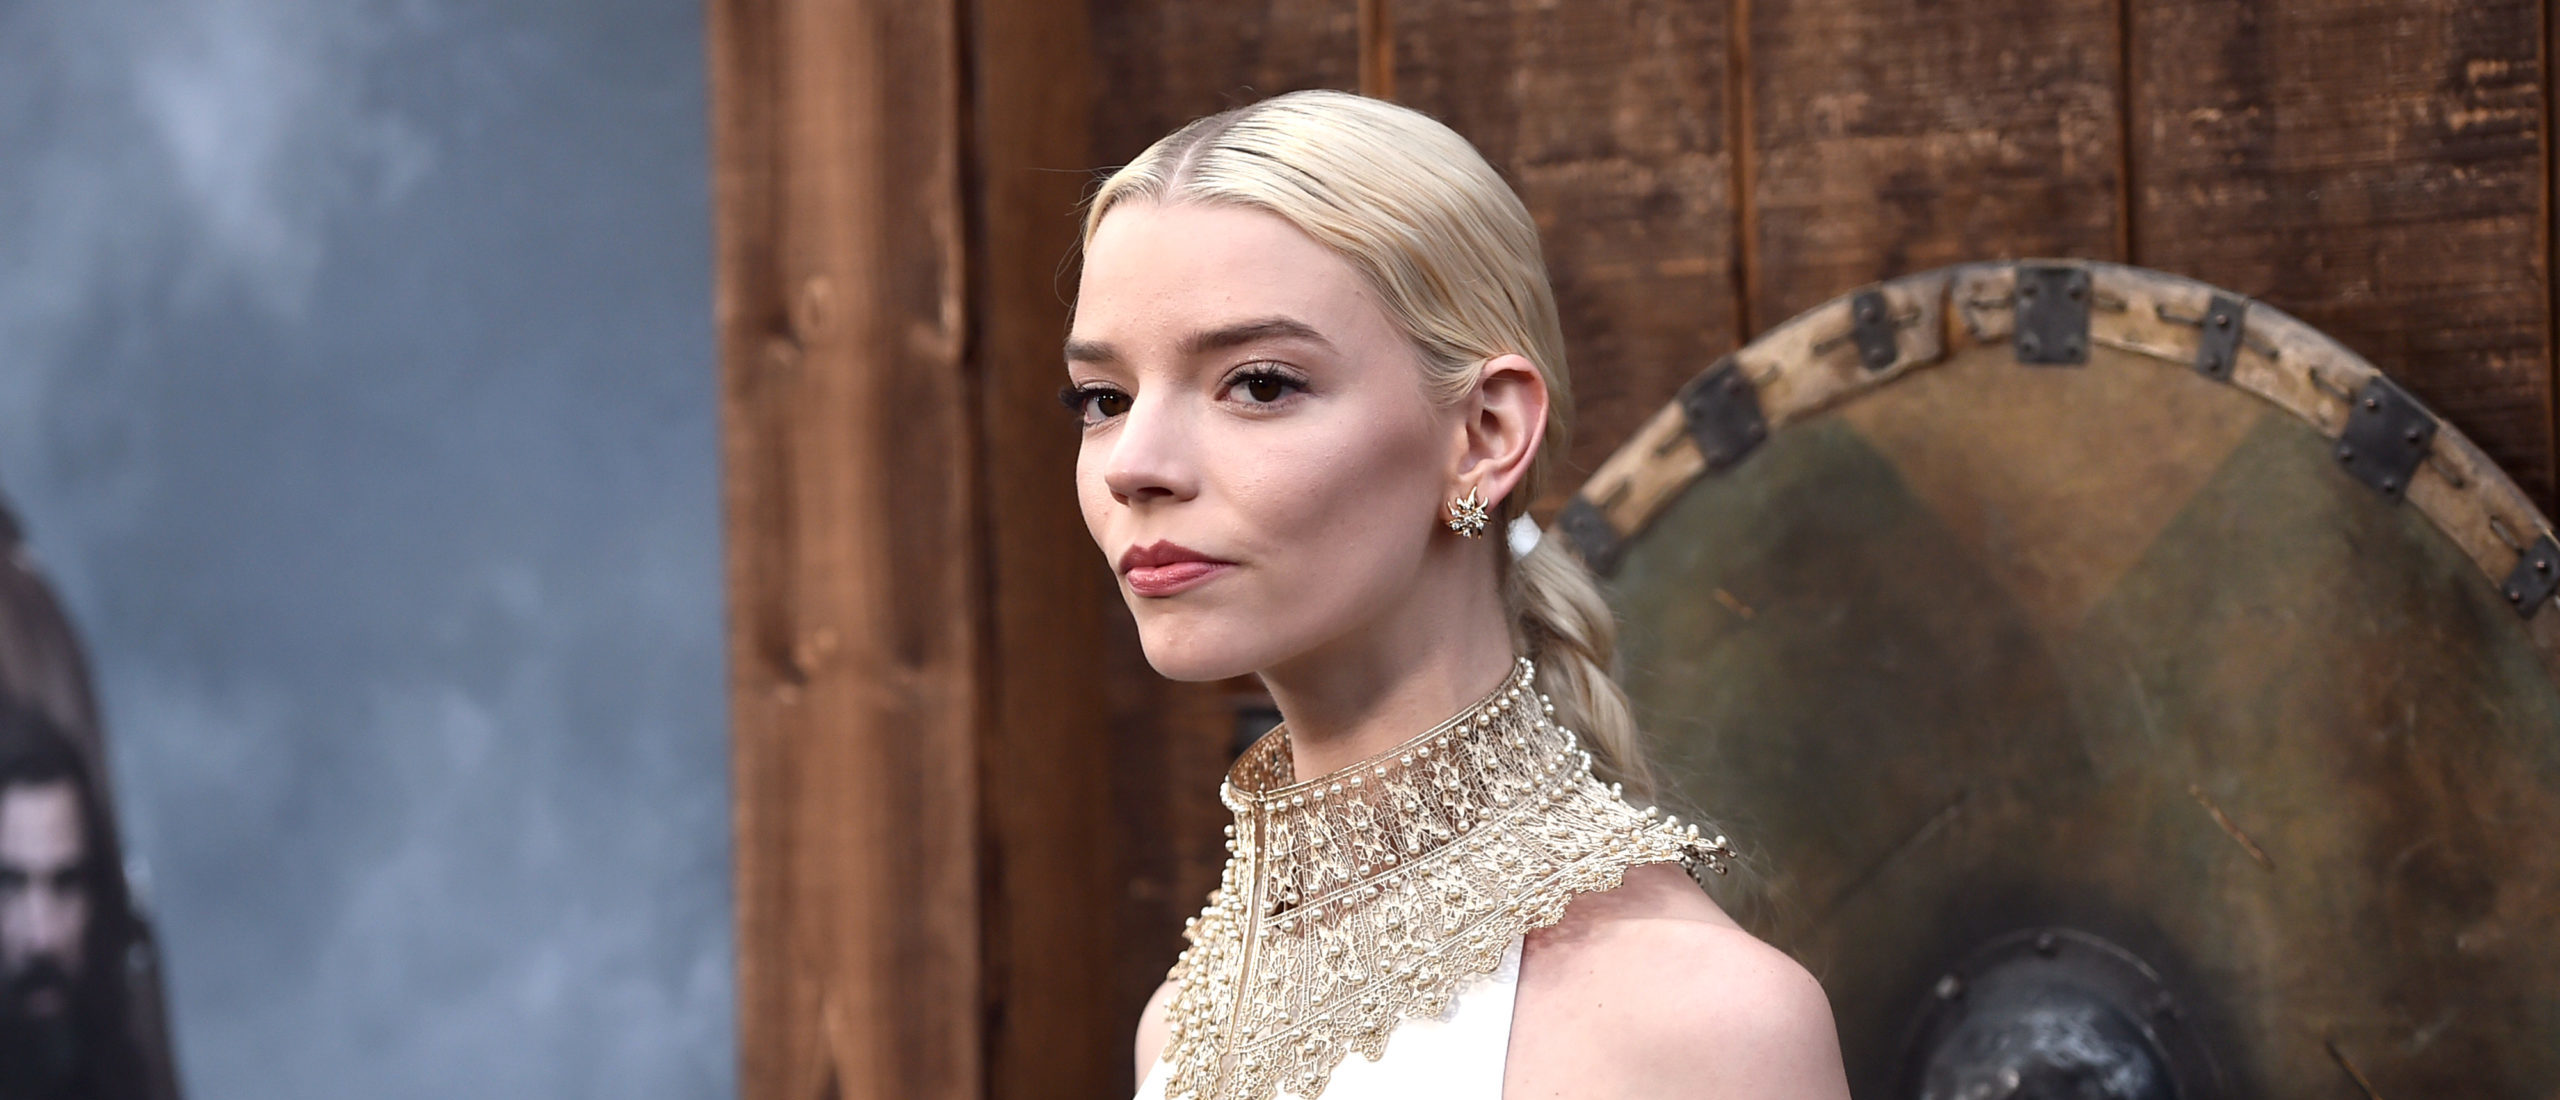 The Queen Gambit Actor Anya Taylor-Joy Gets Married To Malcolm